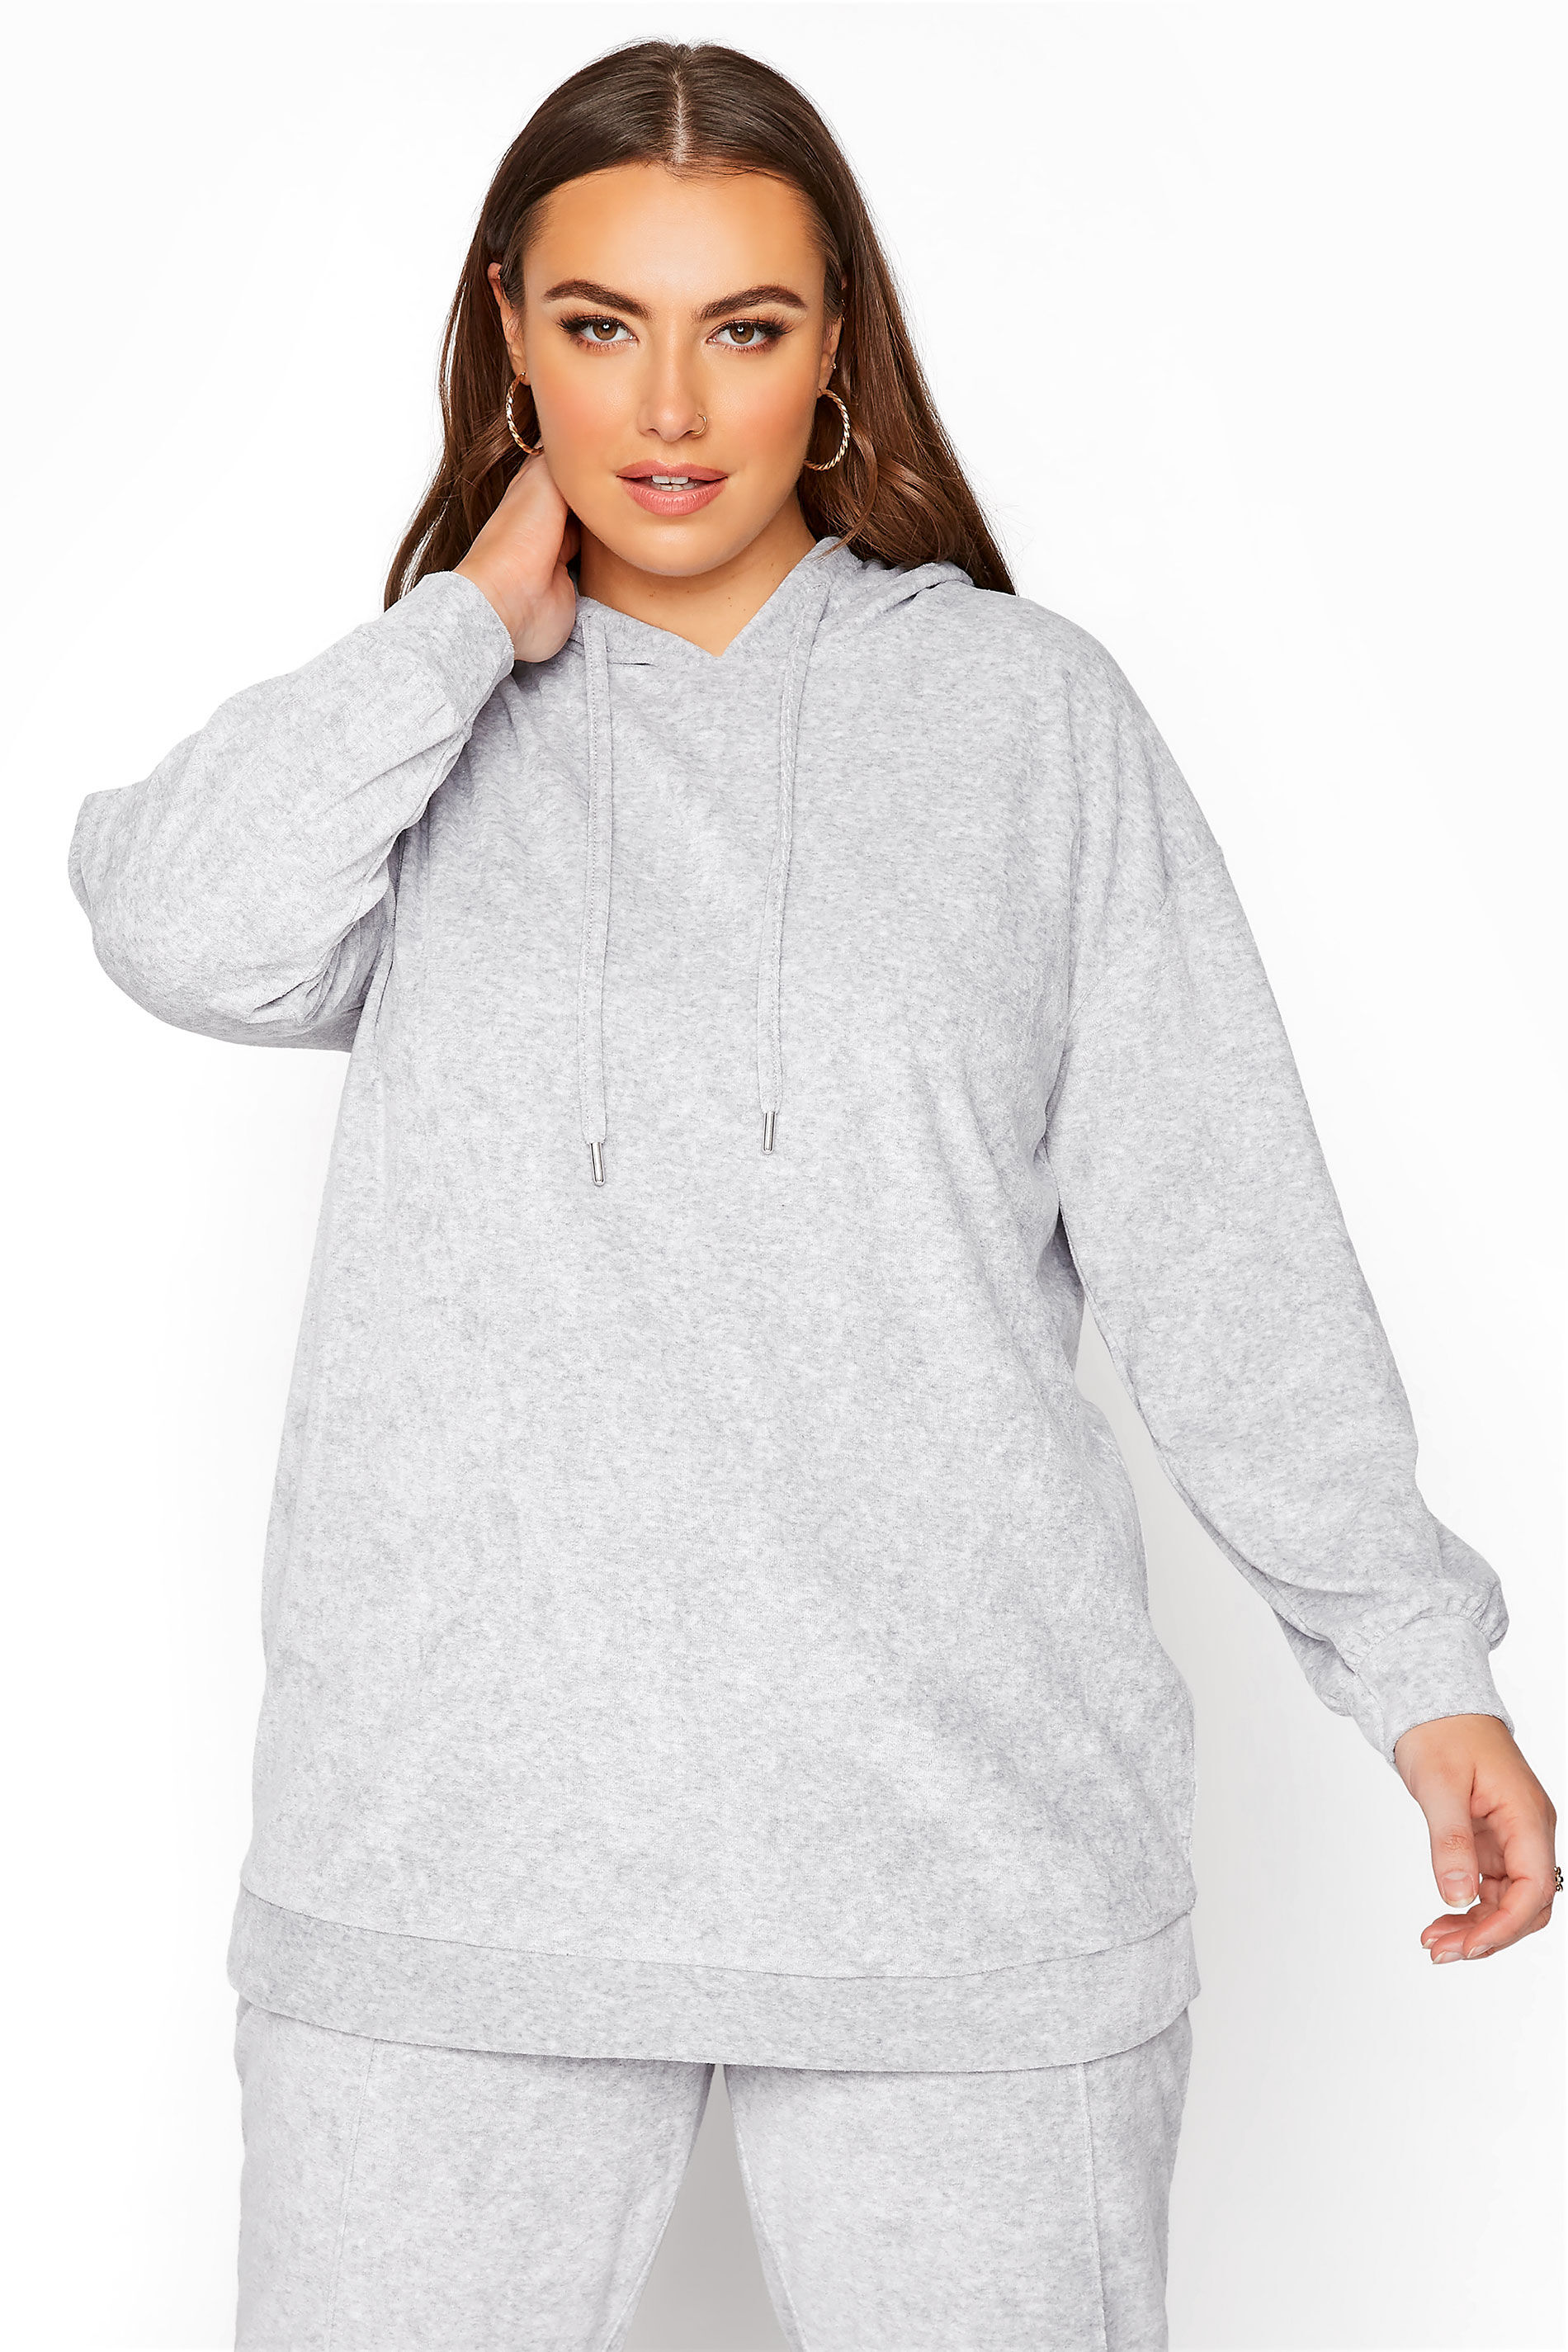 Yours Clothing Plus size grey marl velour sweat hoodie 20